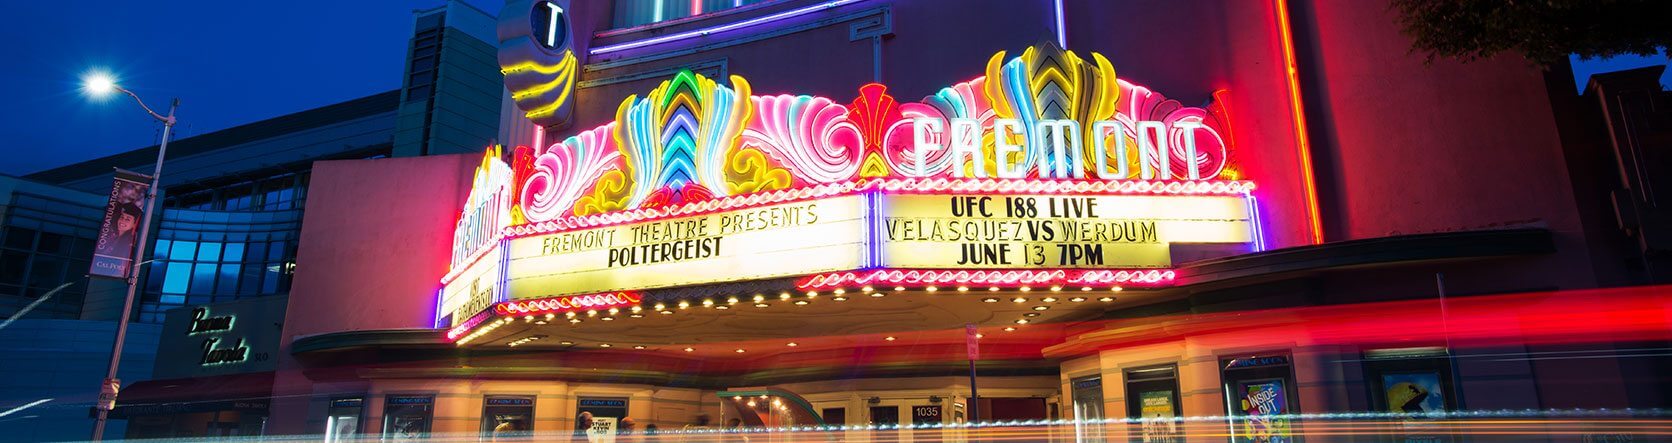 Catch a film at the Fremont Theater in San Luis Obispo